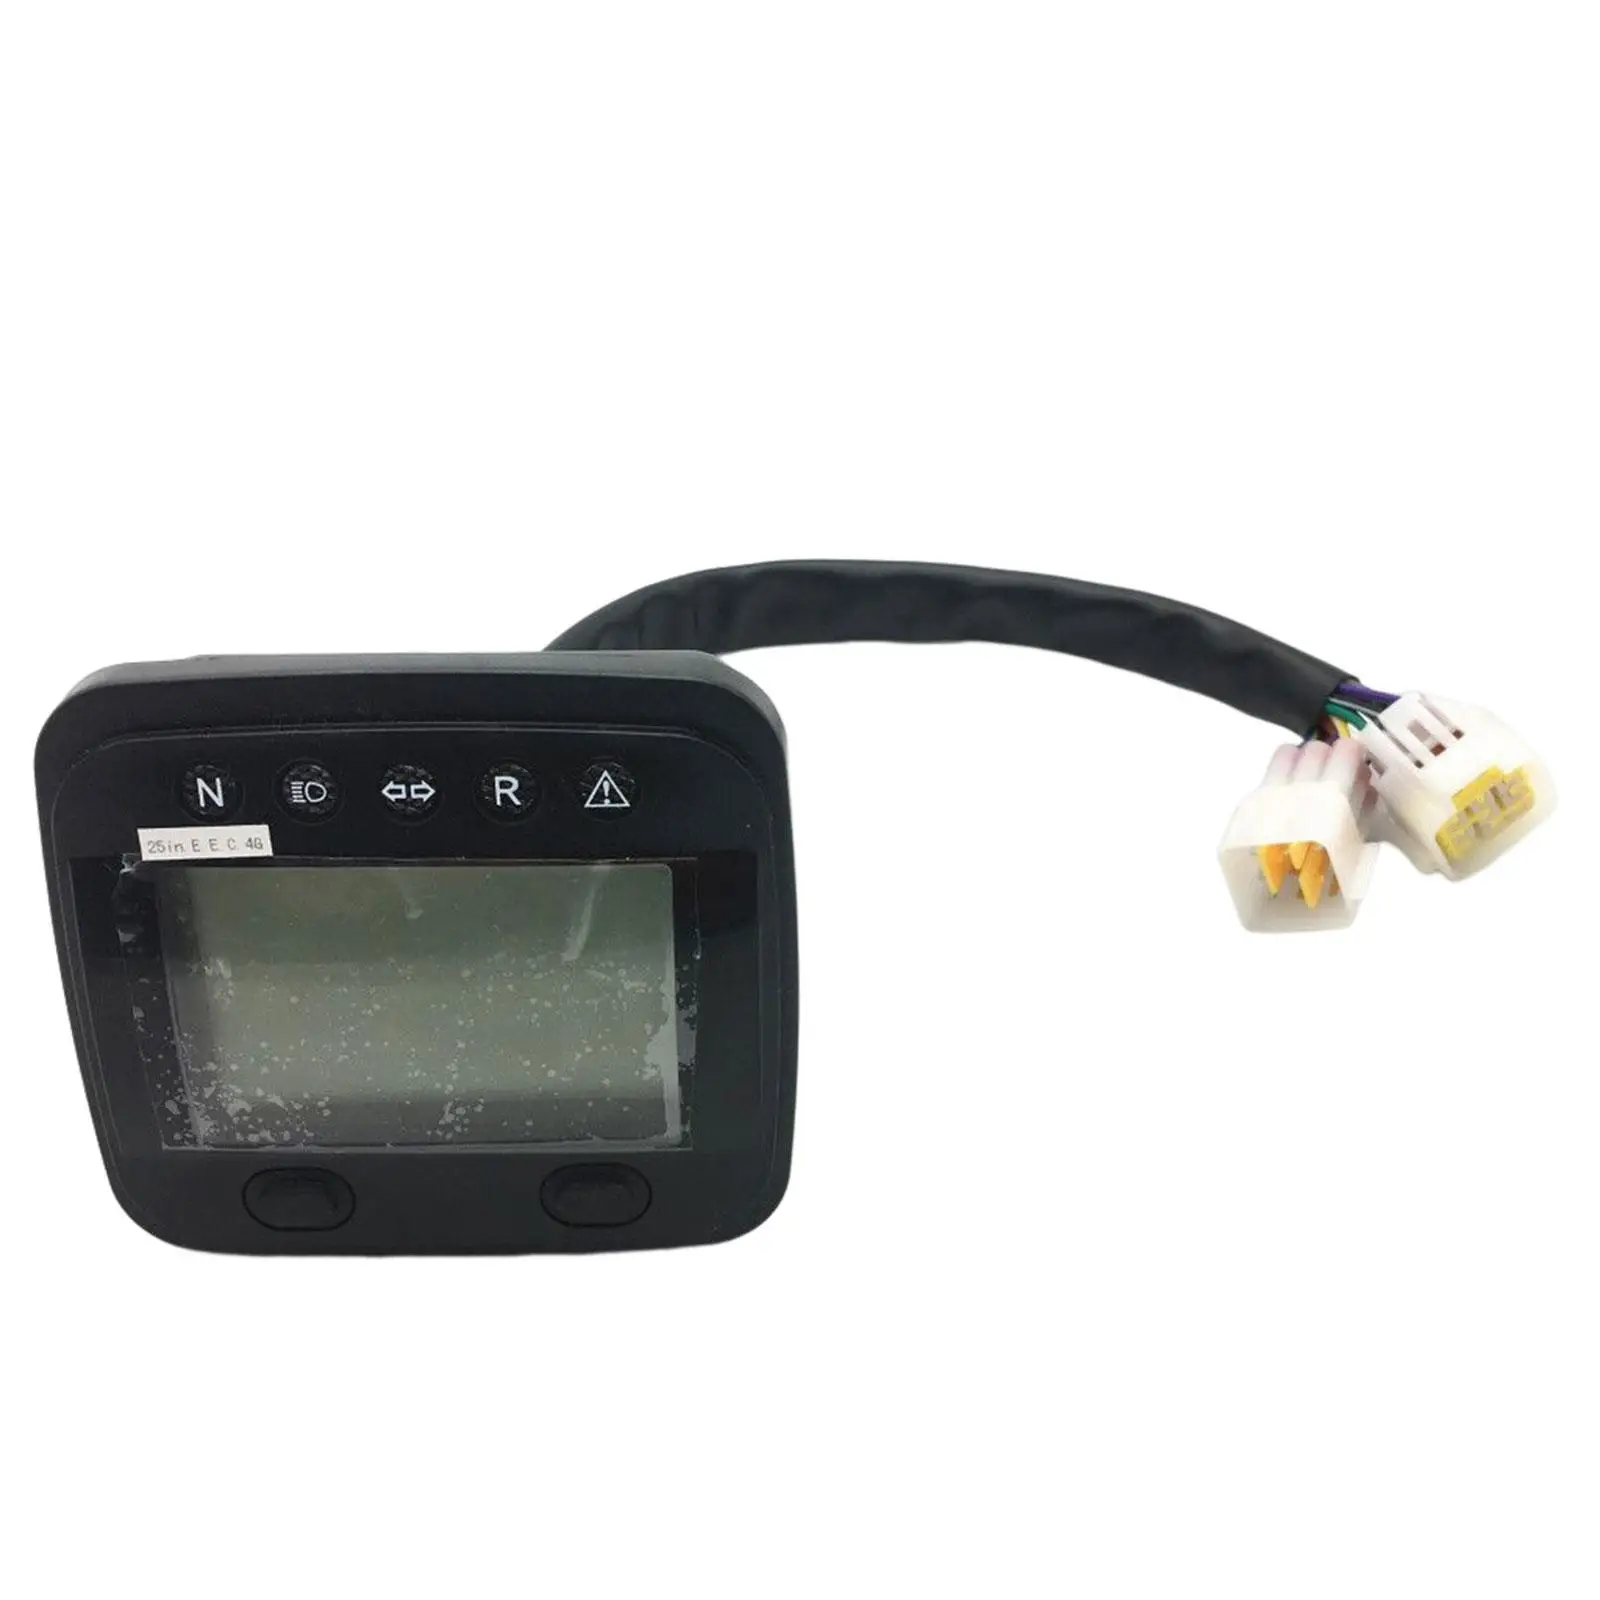 

LCD Speedometer Meter Professional Sturdy Accs Good Performance Easy to Install Repair Parts Motorcycle Gauge for 500cc ATV